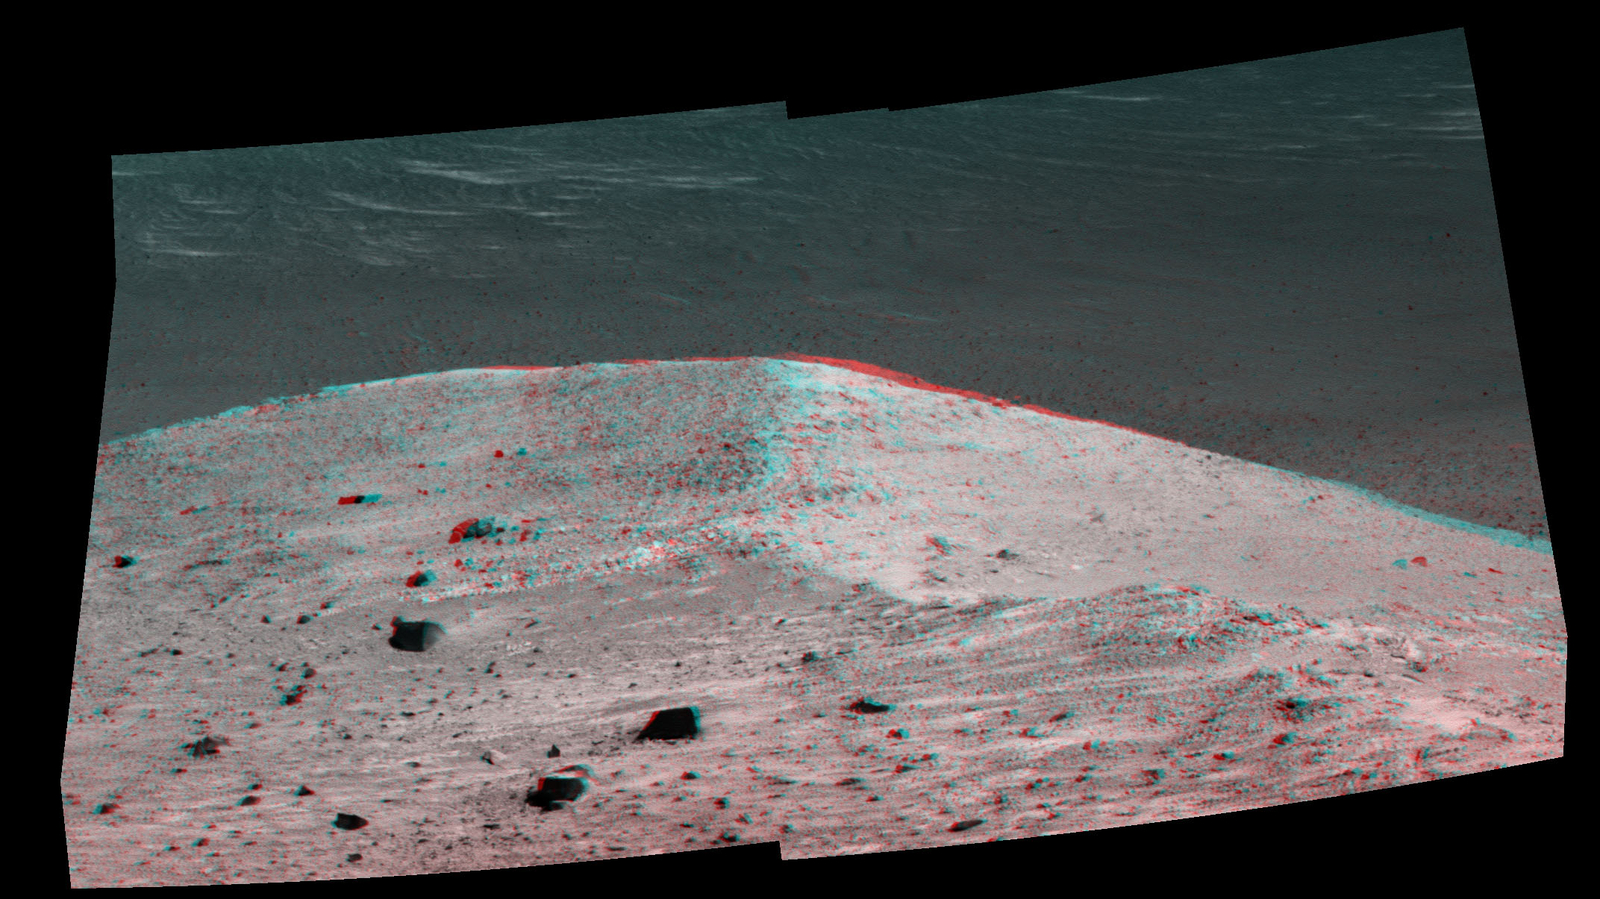 This stereo scene from NASA's Mars Exploration Rover Opportunity shows "Spirit Mound" overlooking the floor of Endeavour Crater. The view appears three-dimensional when seen through blue-red glasses with the red lens on the left.